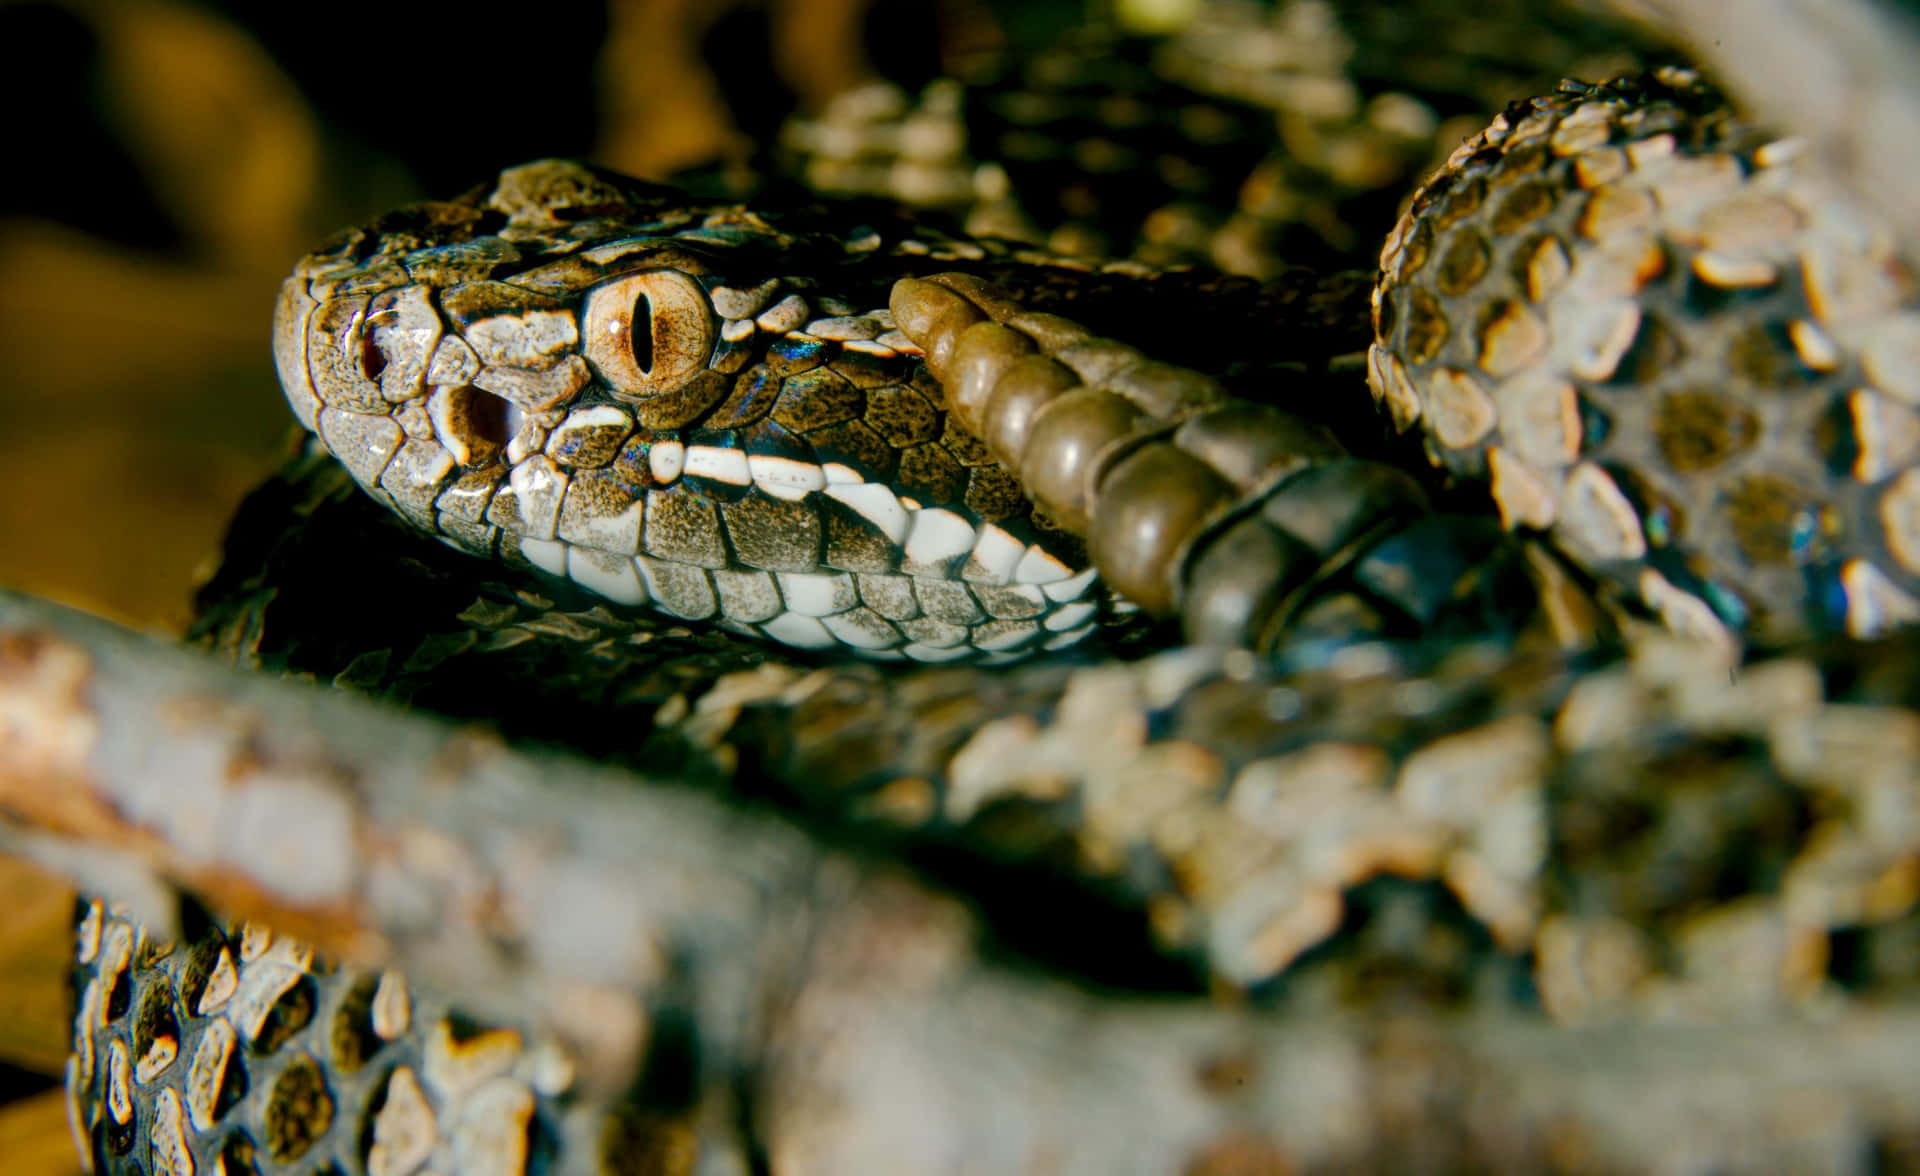 An Exquisite Close-up Shot Of A Snake Found In Michigan.